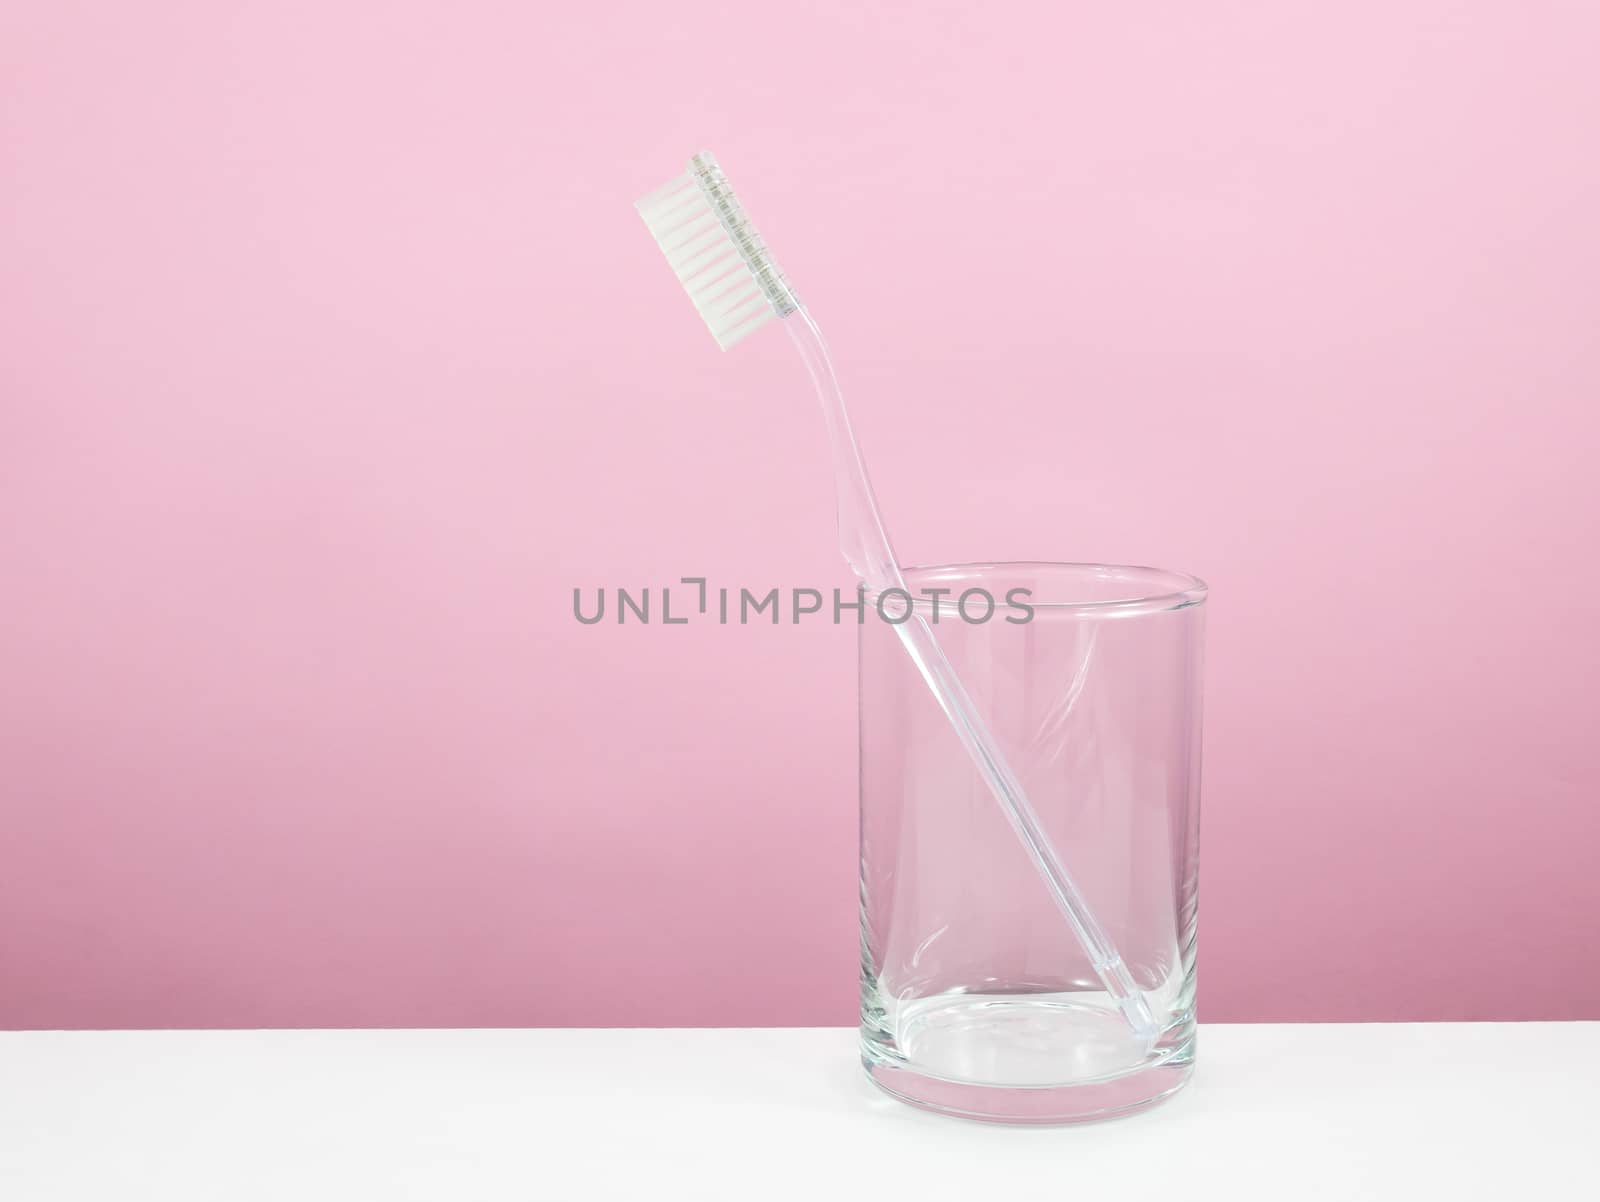 The clear toothbrush with small glass by phasuthorn